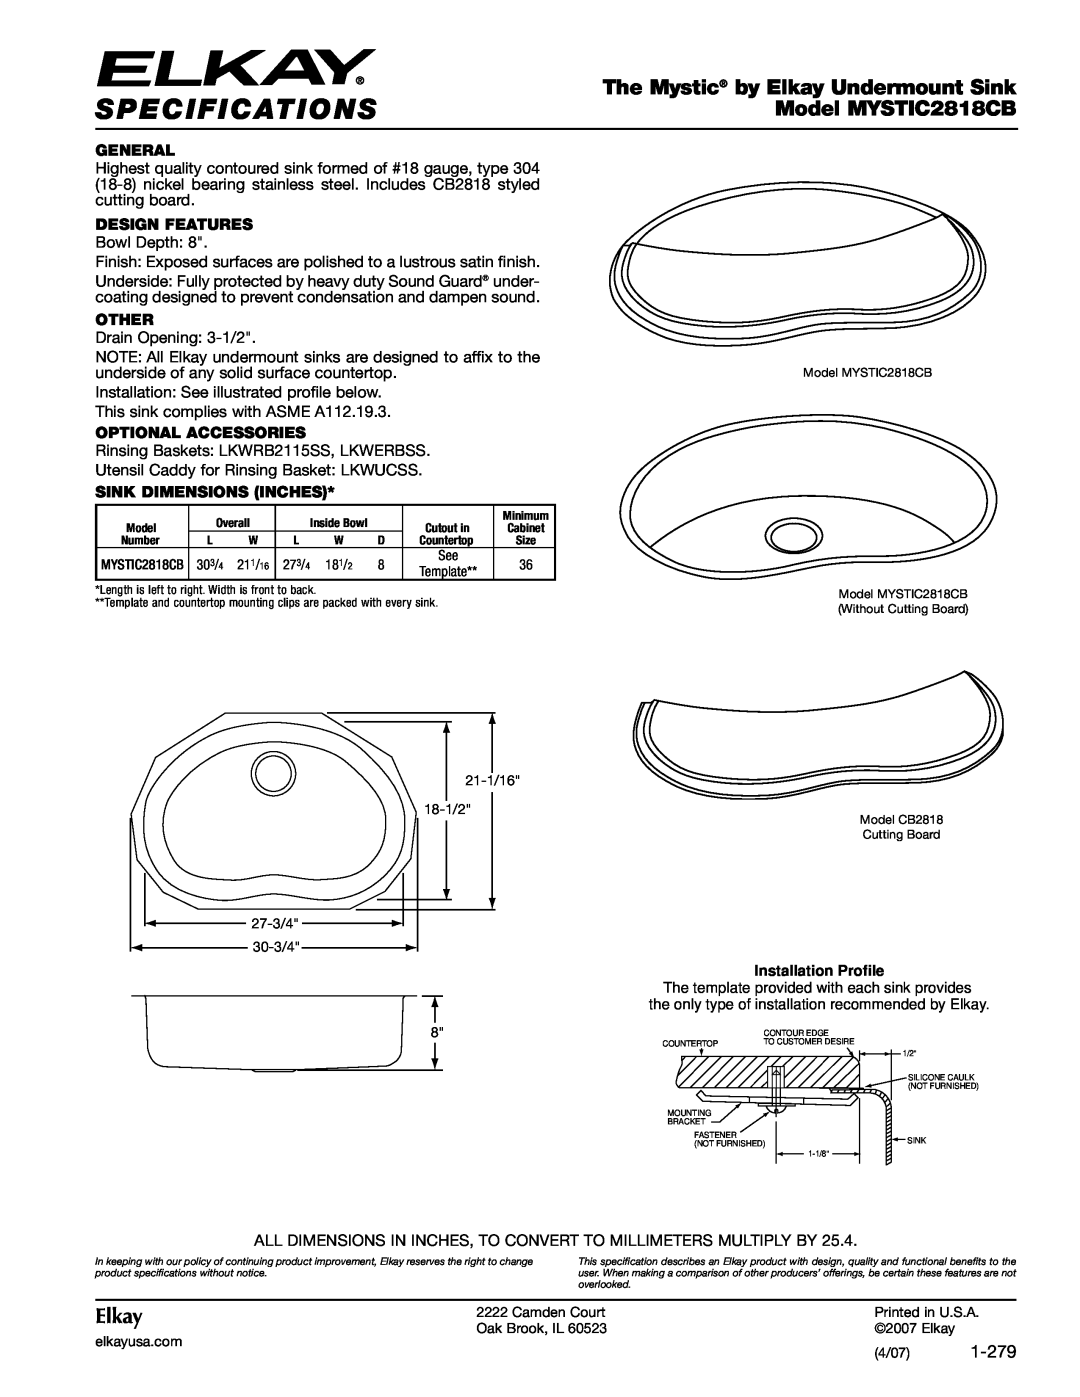 Elkay specifications Specifications, The Mystic by Elkay Undermount Sink, Model MYSTIC2818CB, 1-279, General, Other 